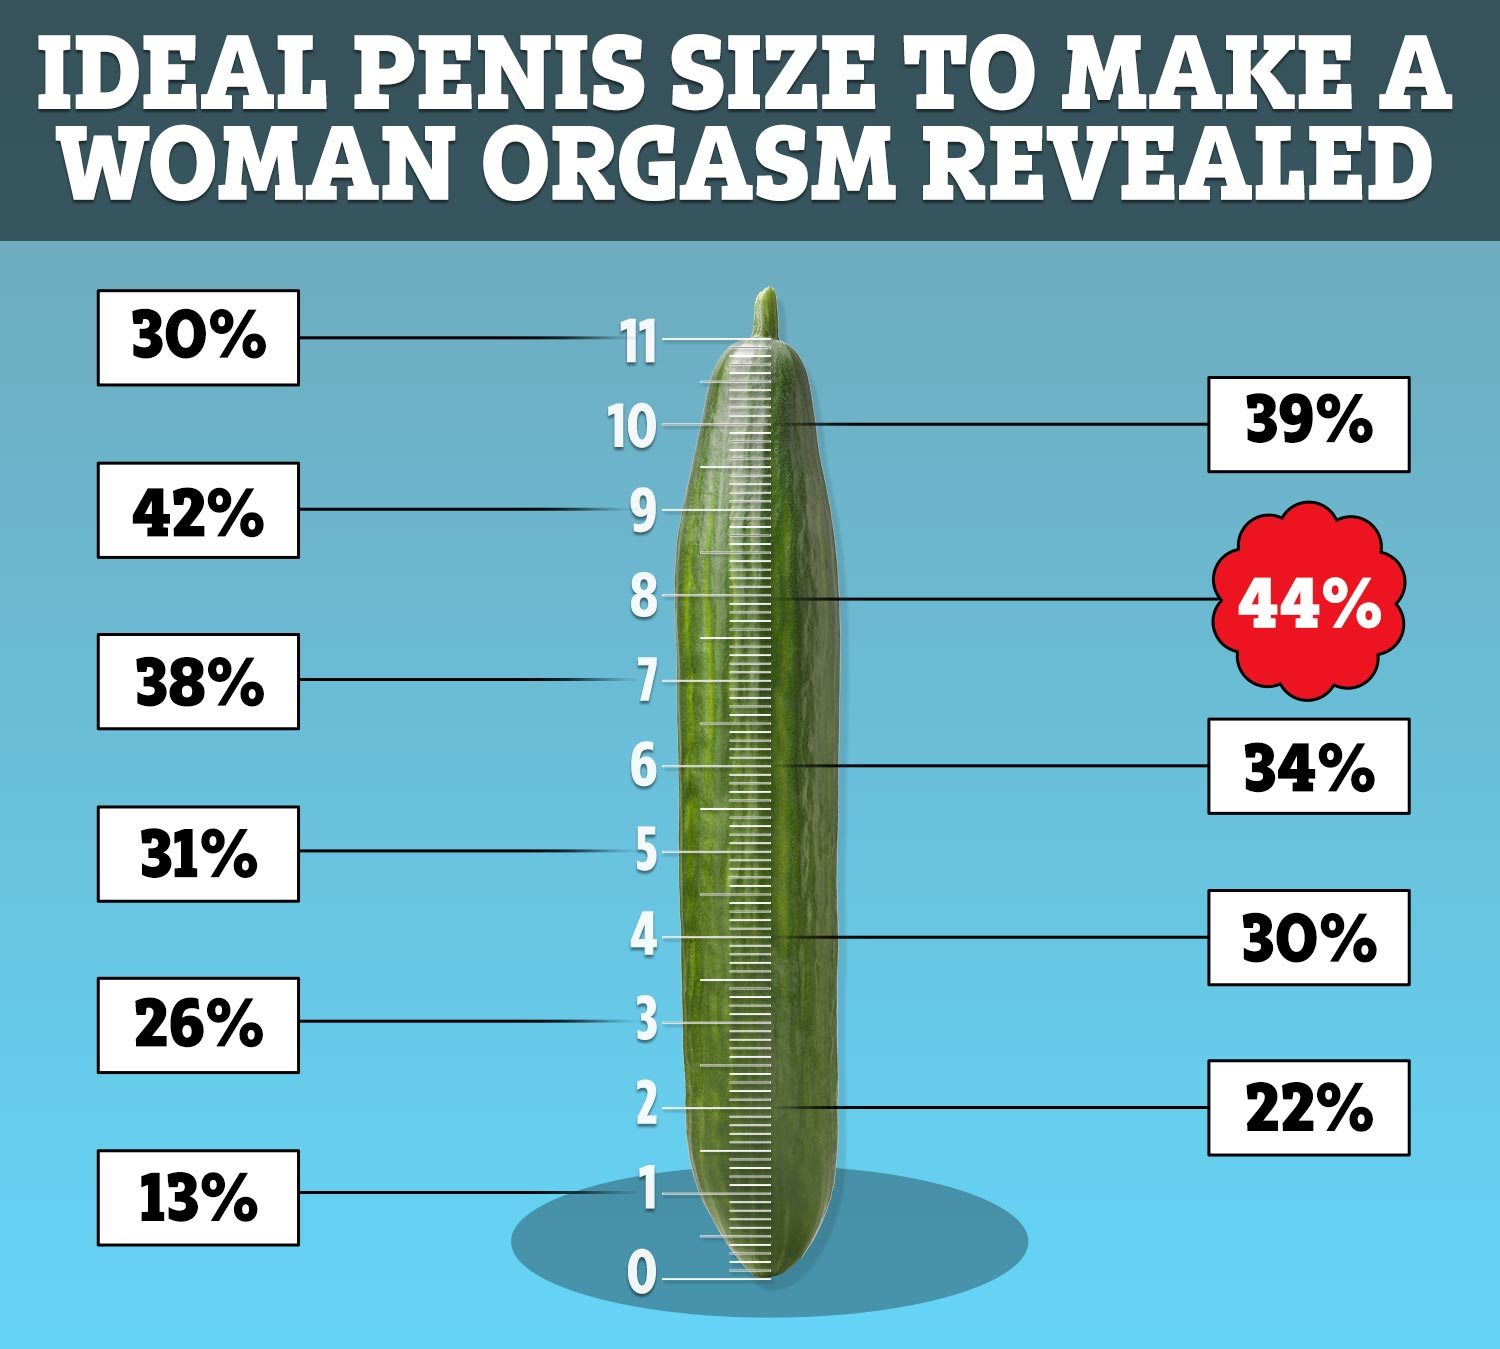 Ideal Penis sizes according to women.